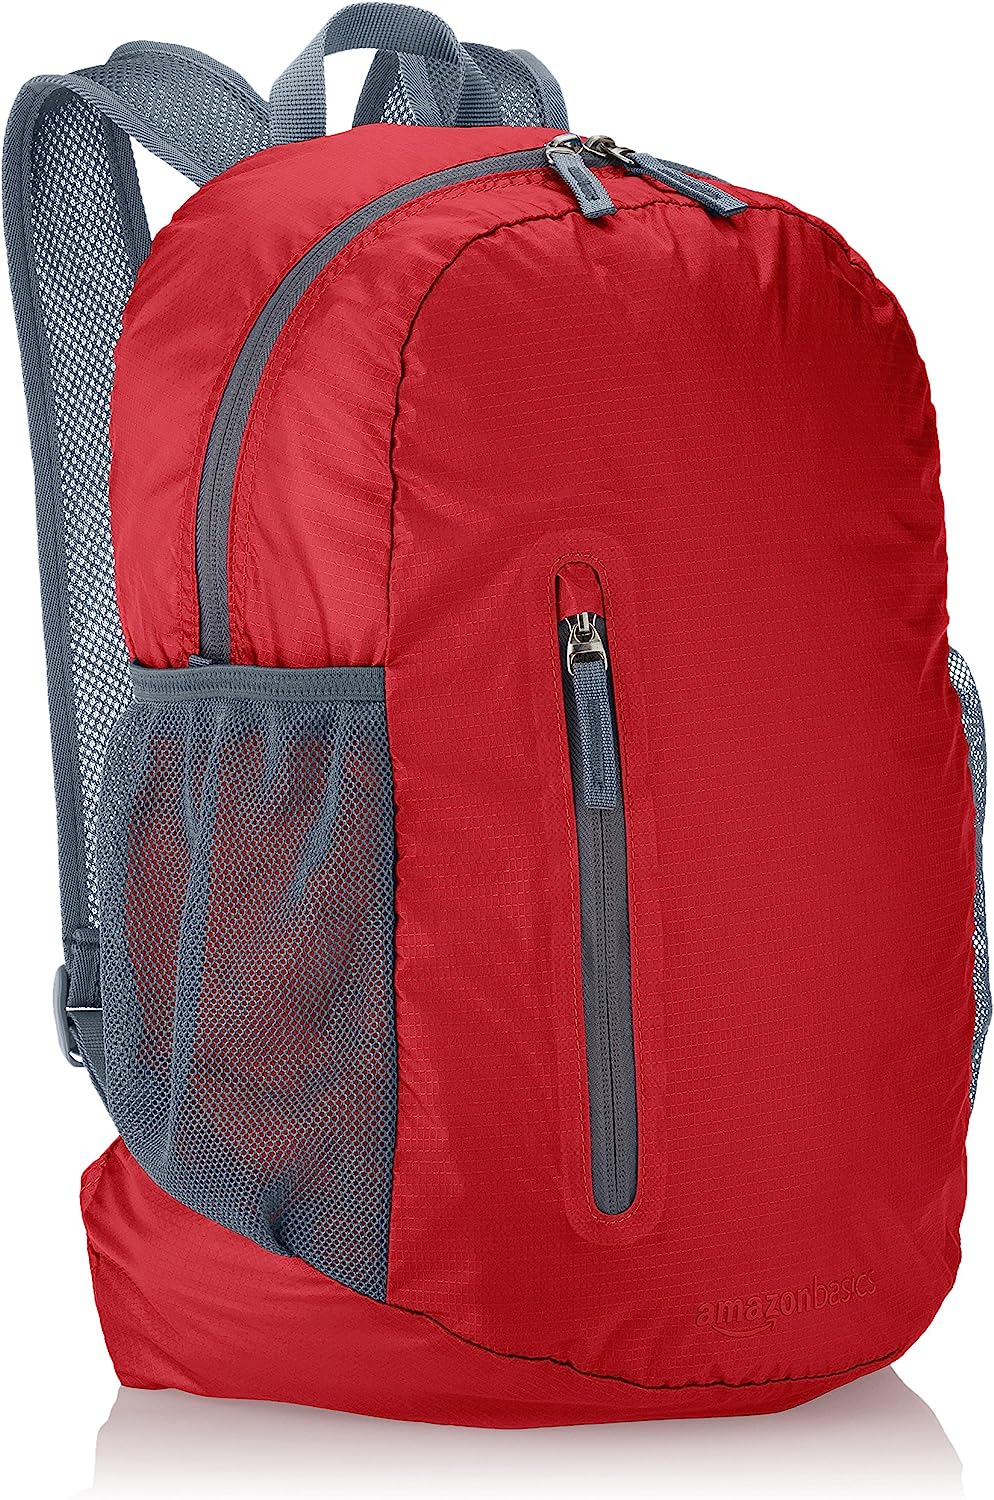 Amazon Basics Ultralight Portable Packable Day Pack